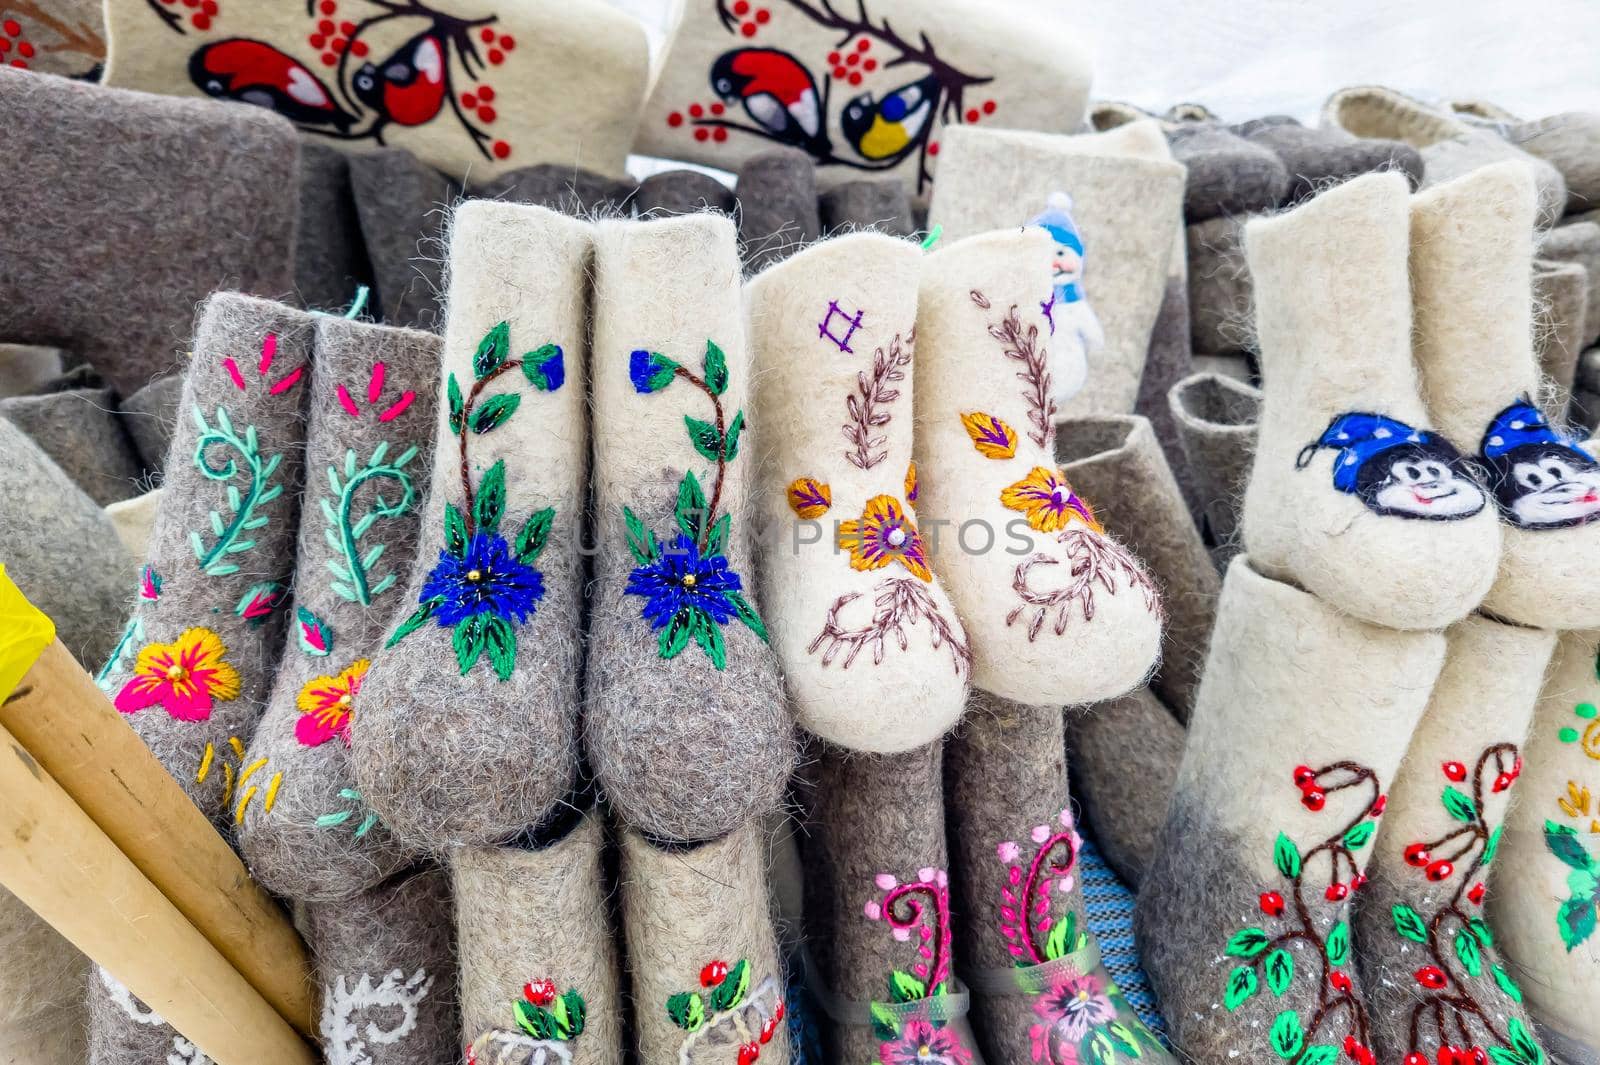 Valenki - traditional Russian winter shoes made of felt by Milanchikov